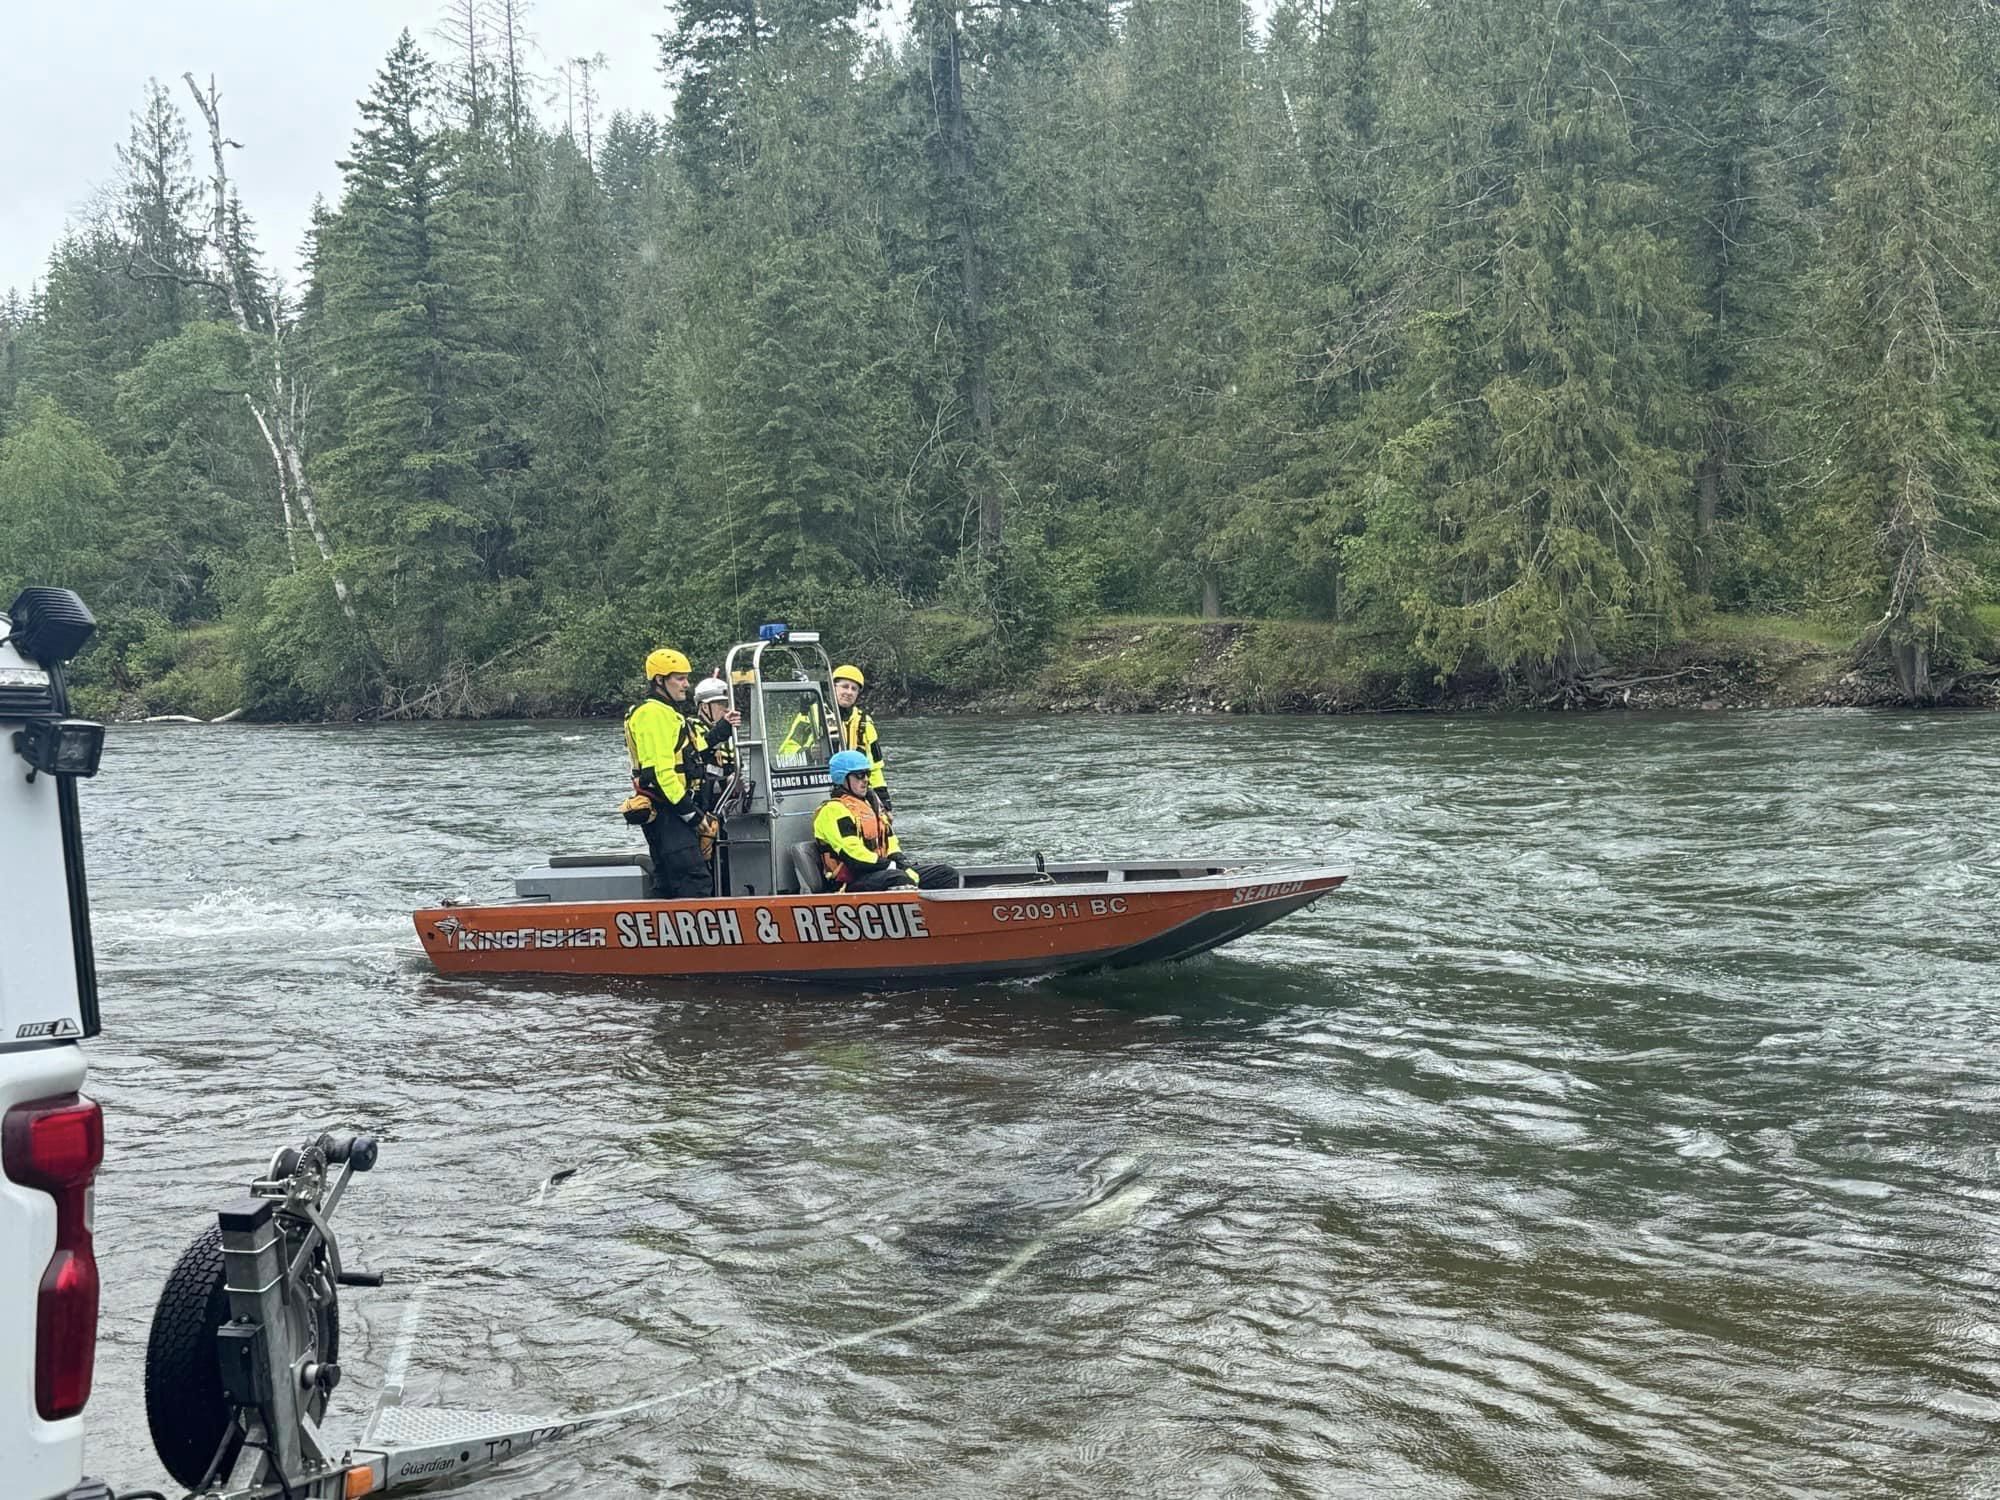 With temperatures rising, Okanagan search and rescue group urges water safety